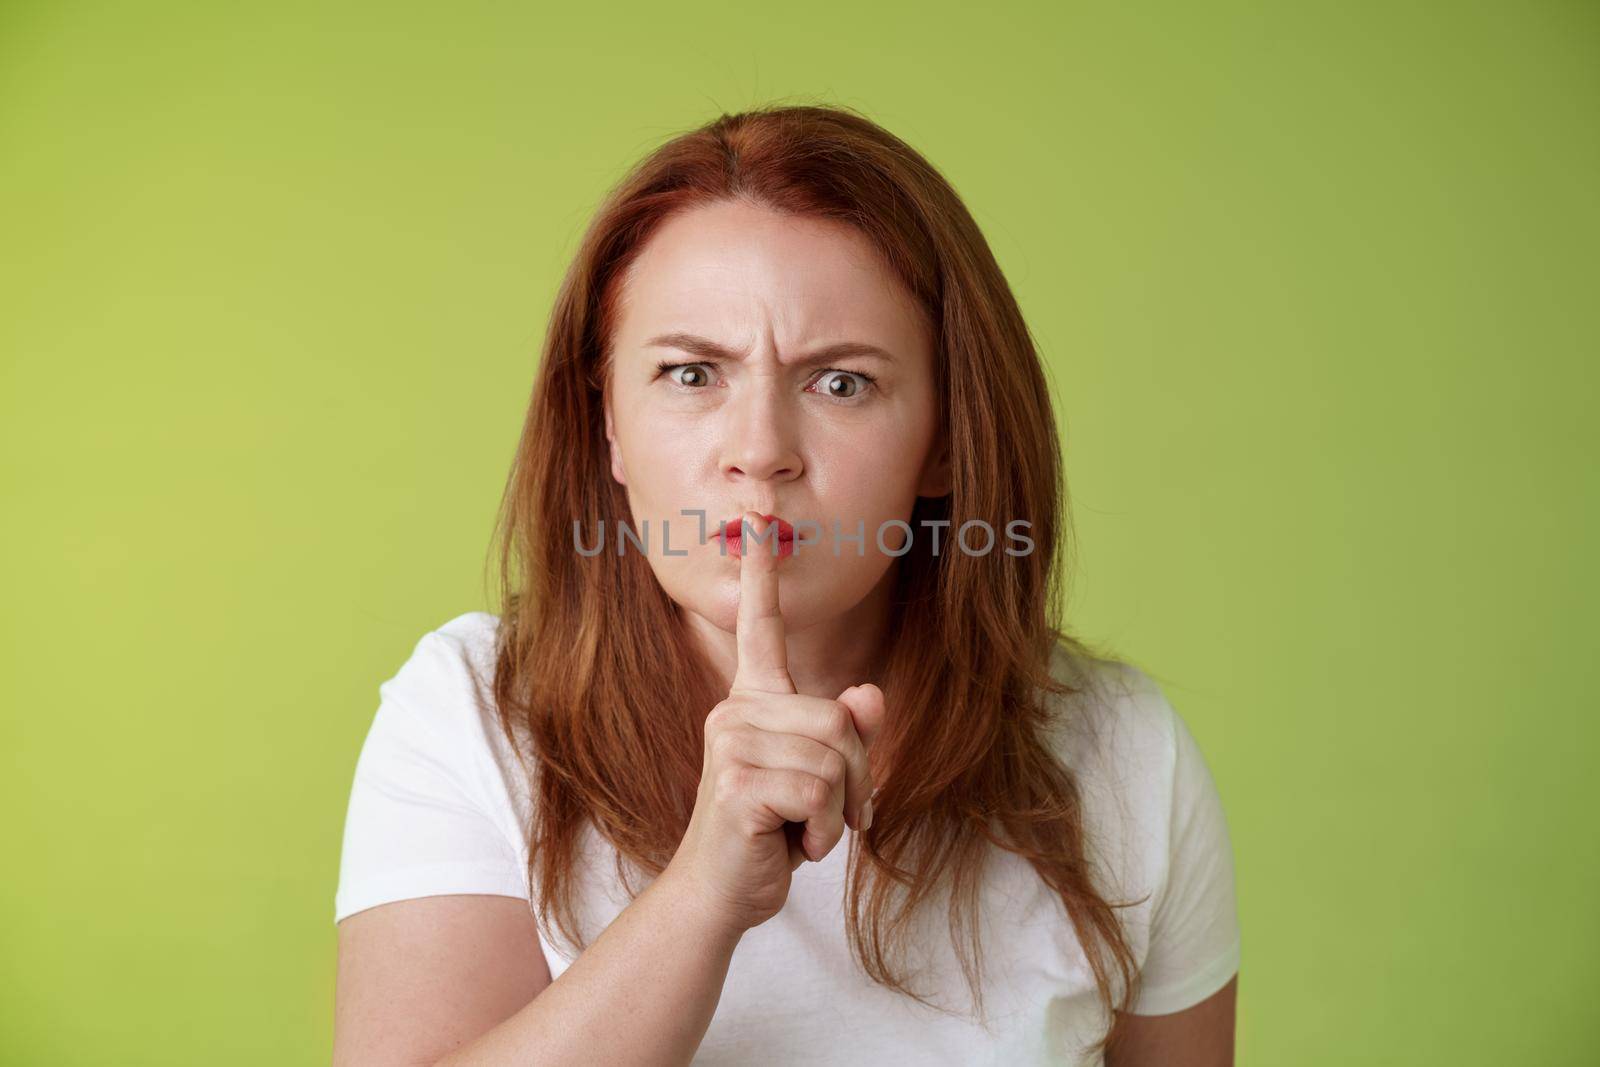 Not speak during exam. Strict serious-looking displeased middle-aged redhead woman frowning disappointed hushing say shush index finger pressed lips keep quiet gesture green background.